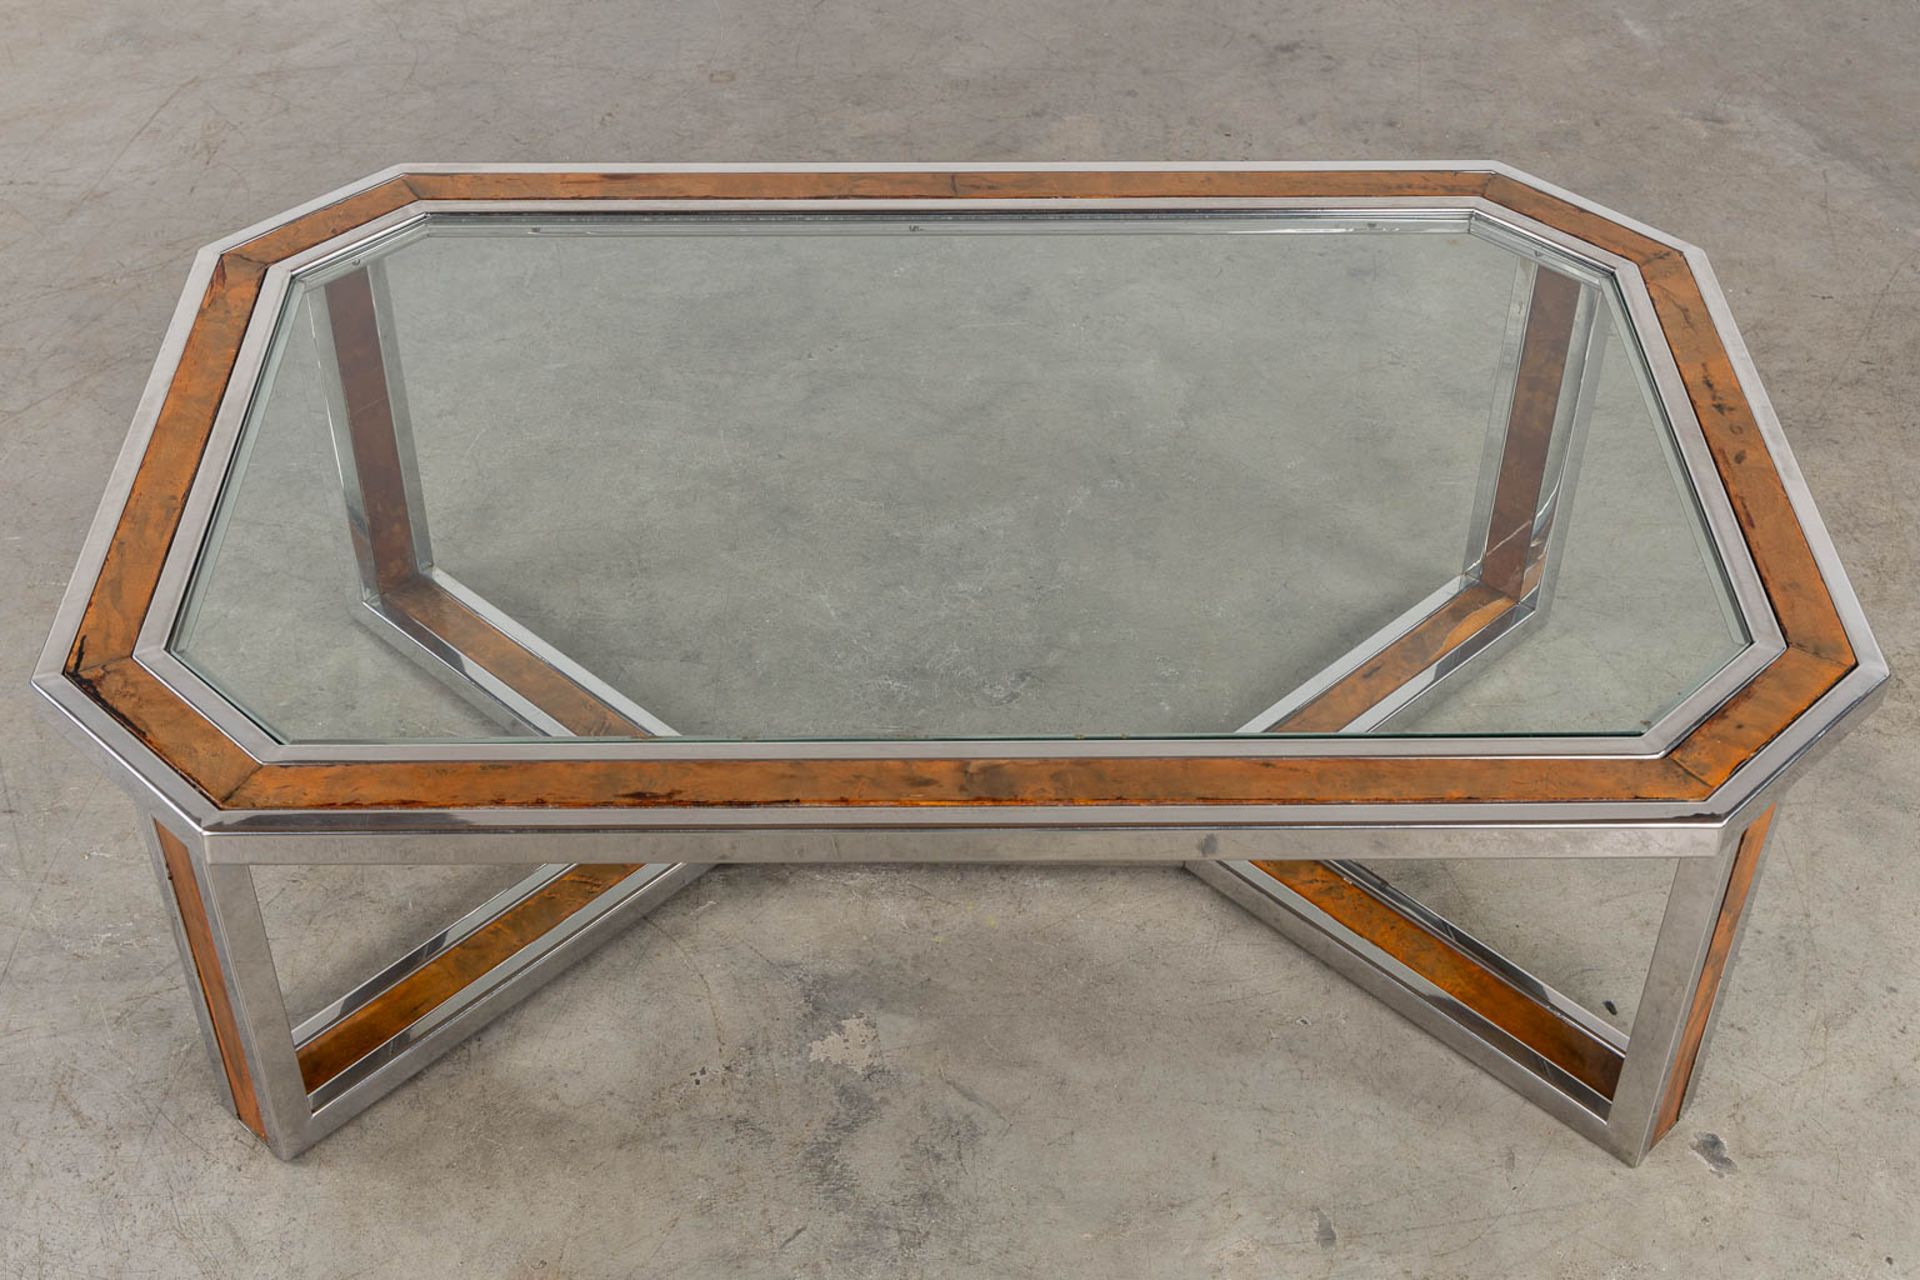 A coffee table, chrome with a faux wood inlay and a glass top. (L:80 x W:120 x H:40 cm) - Image 7 of 10